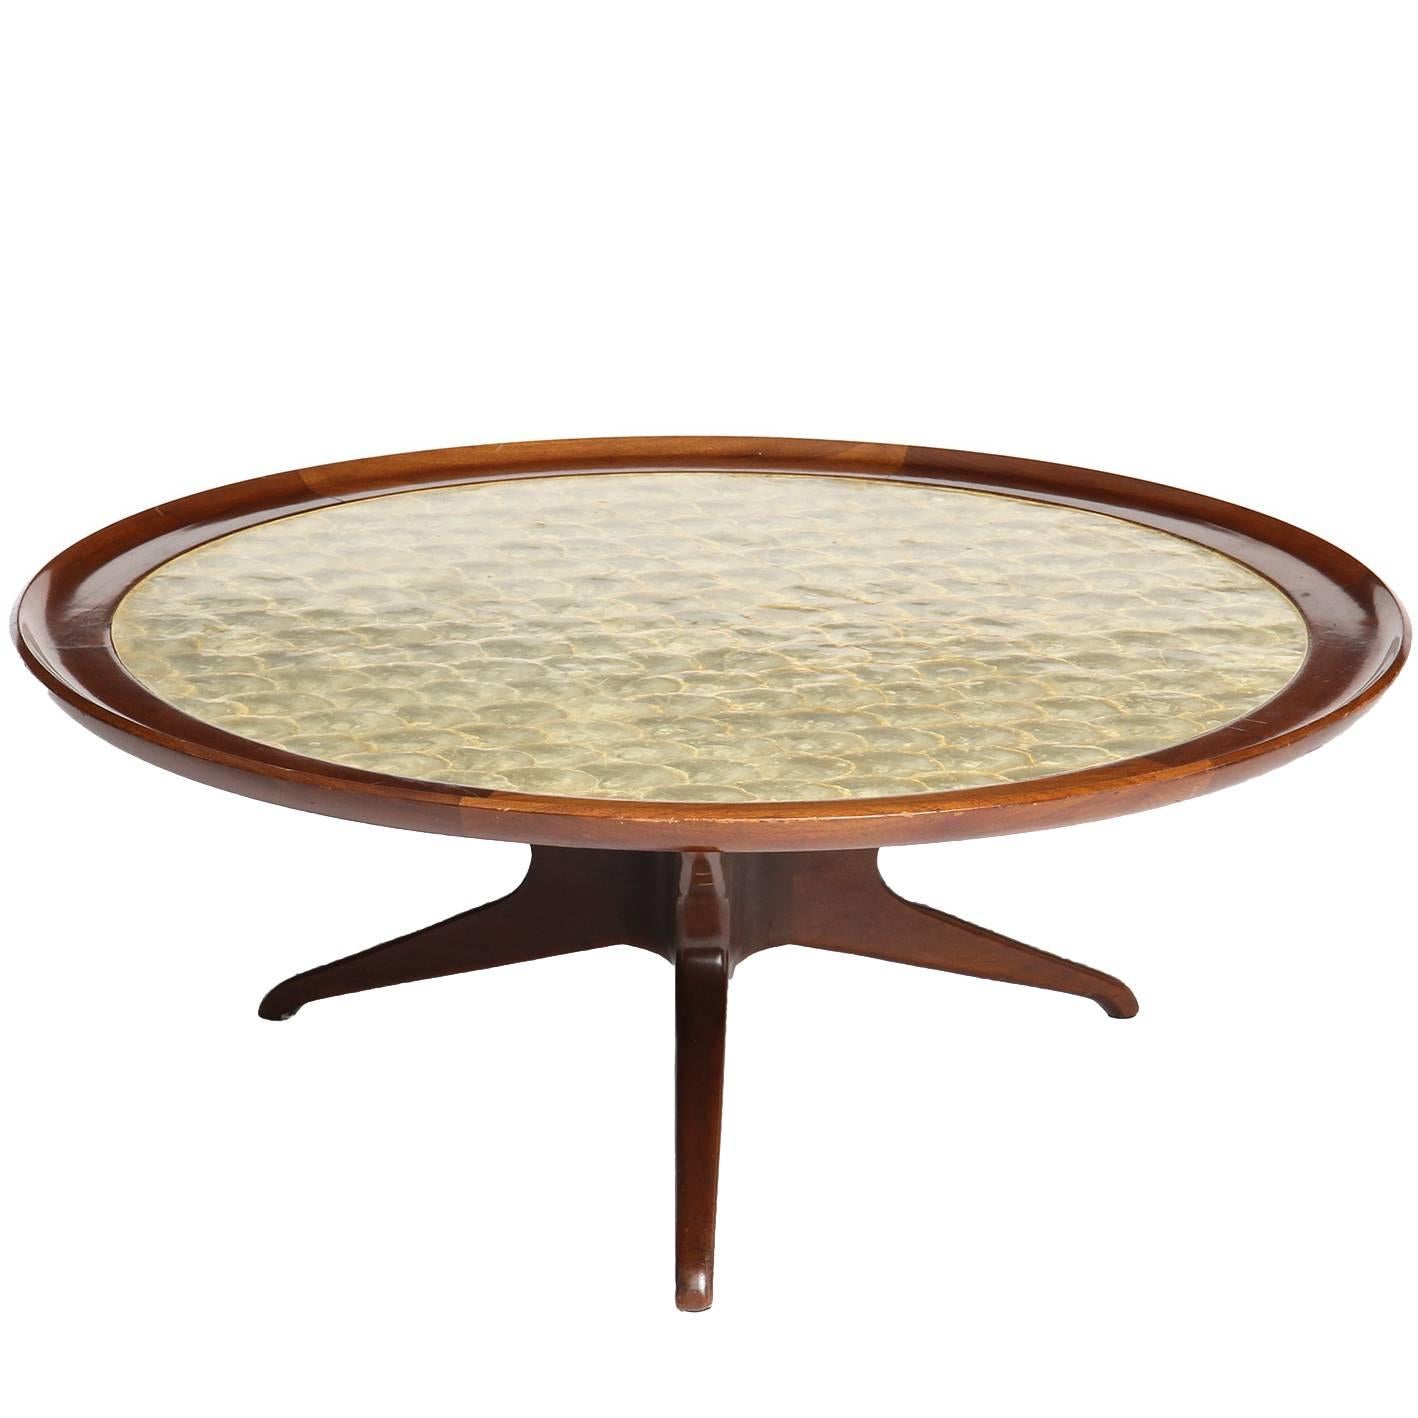 Sculptural Capiz Topped Low Table